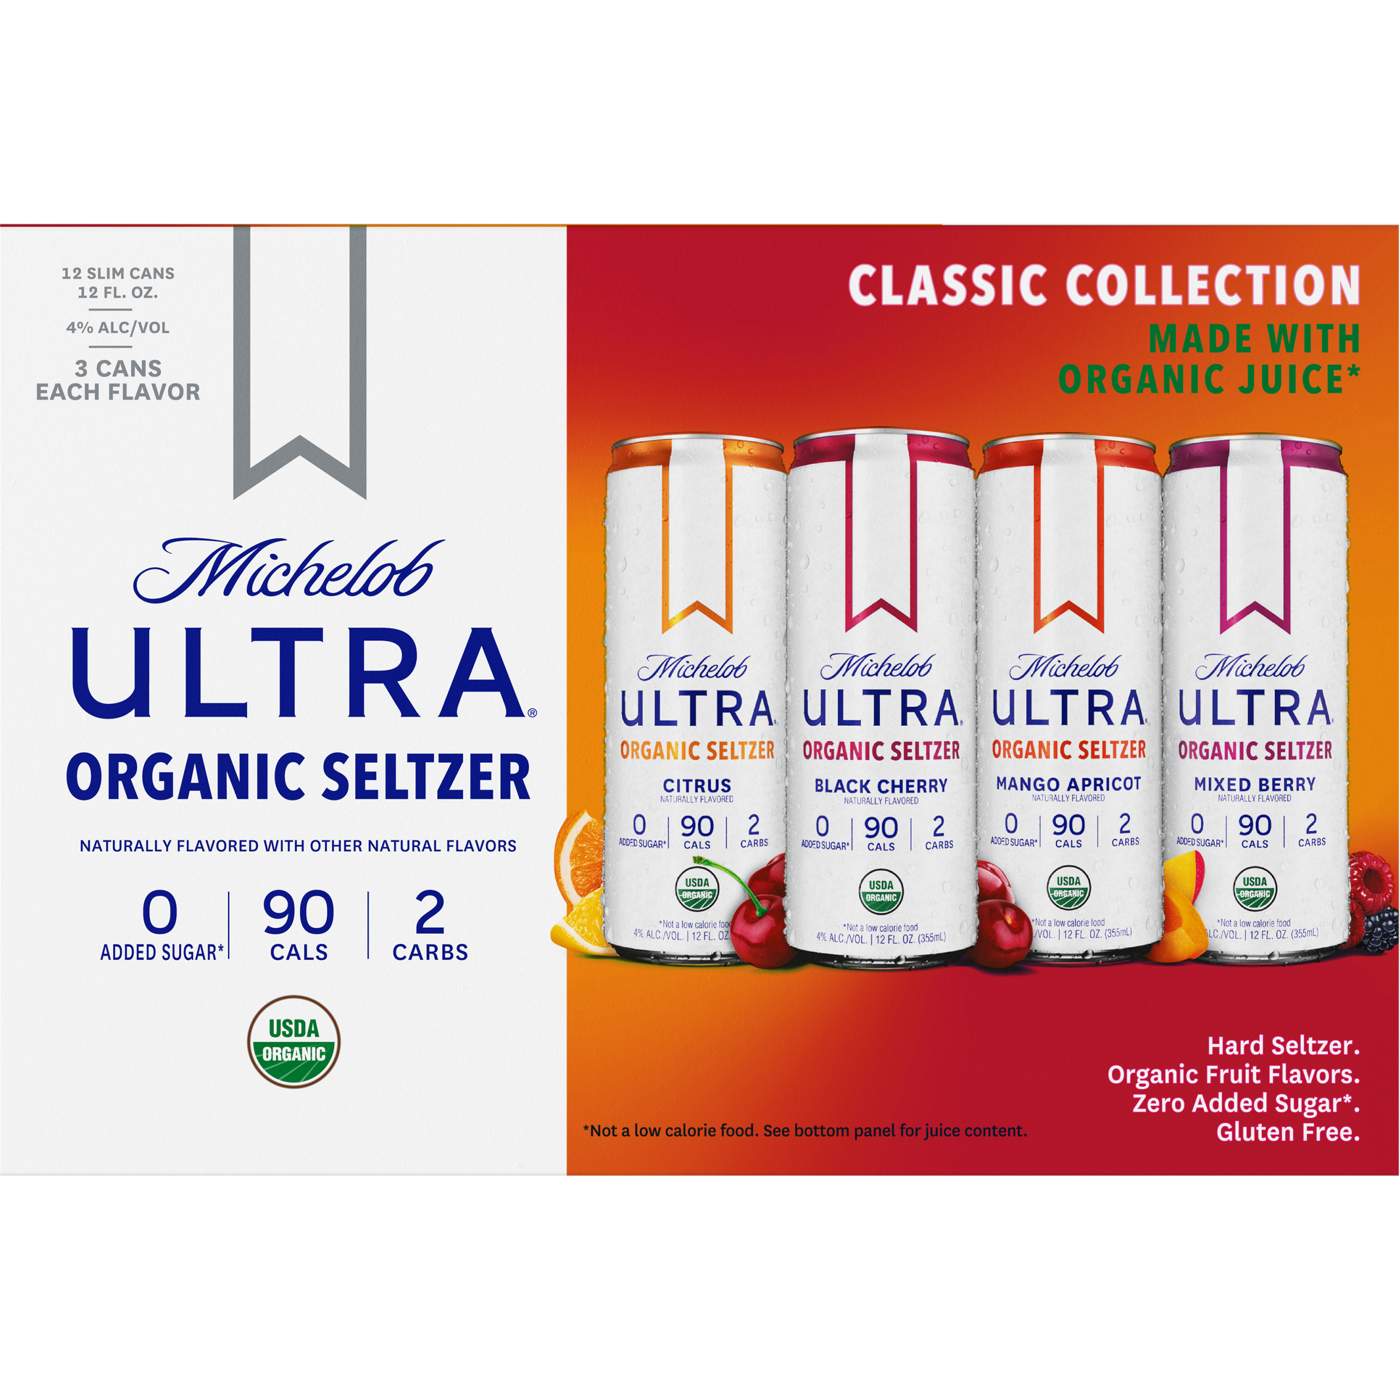 Michelob Ultra Organic Seltzer Variety Pack 12 oz Cans; image 2 of 2